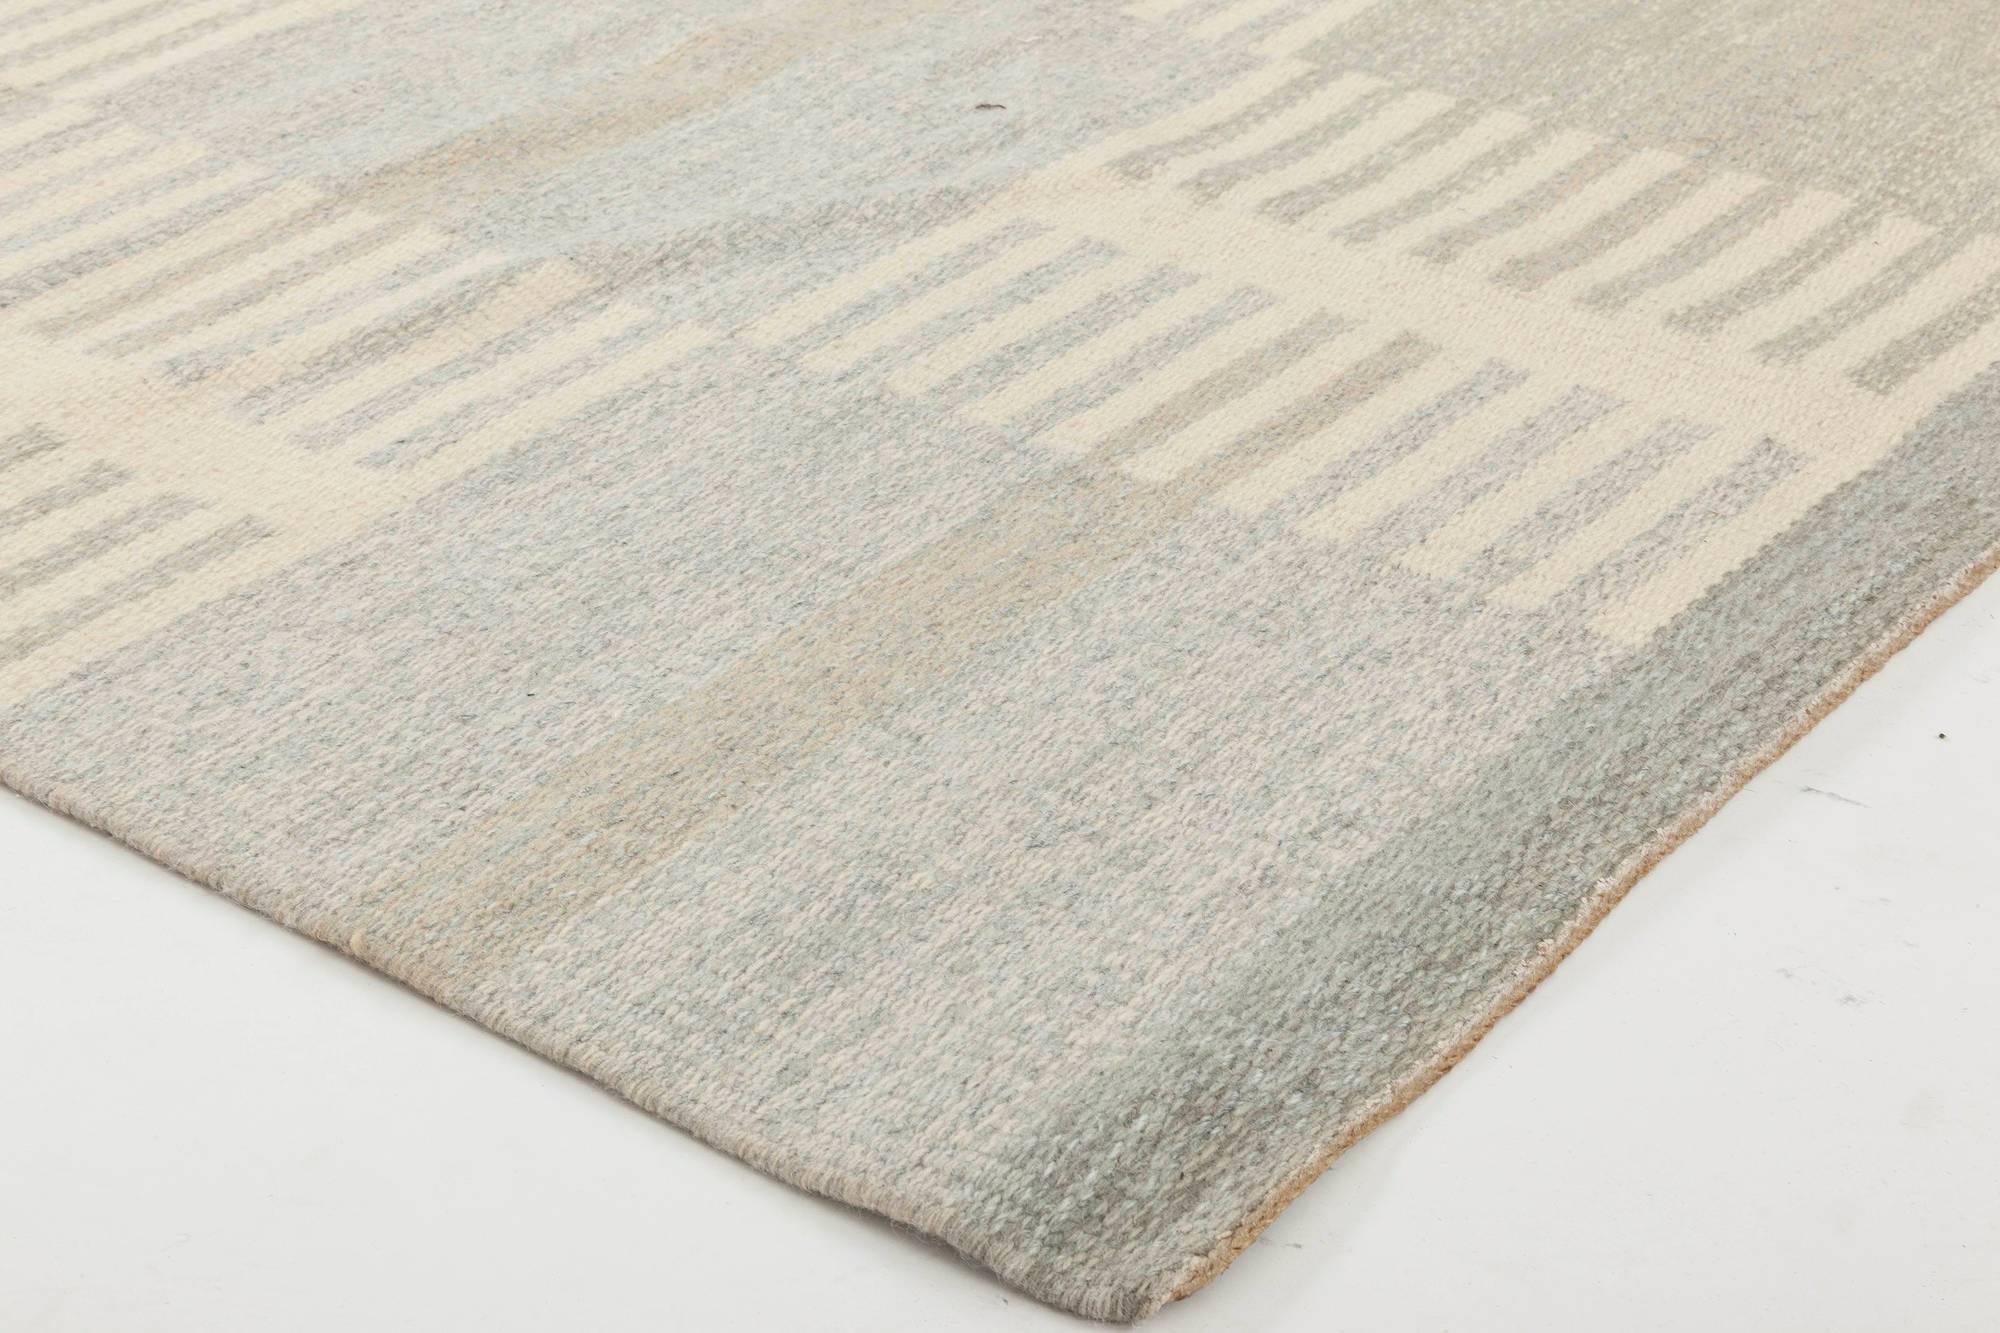 20th Century Midcentury Swedish Gray, Blue and Ivory Flat-Weave Wool Rug by Carl Malmsten